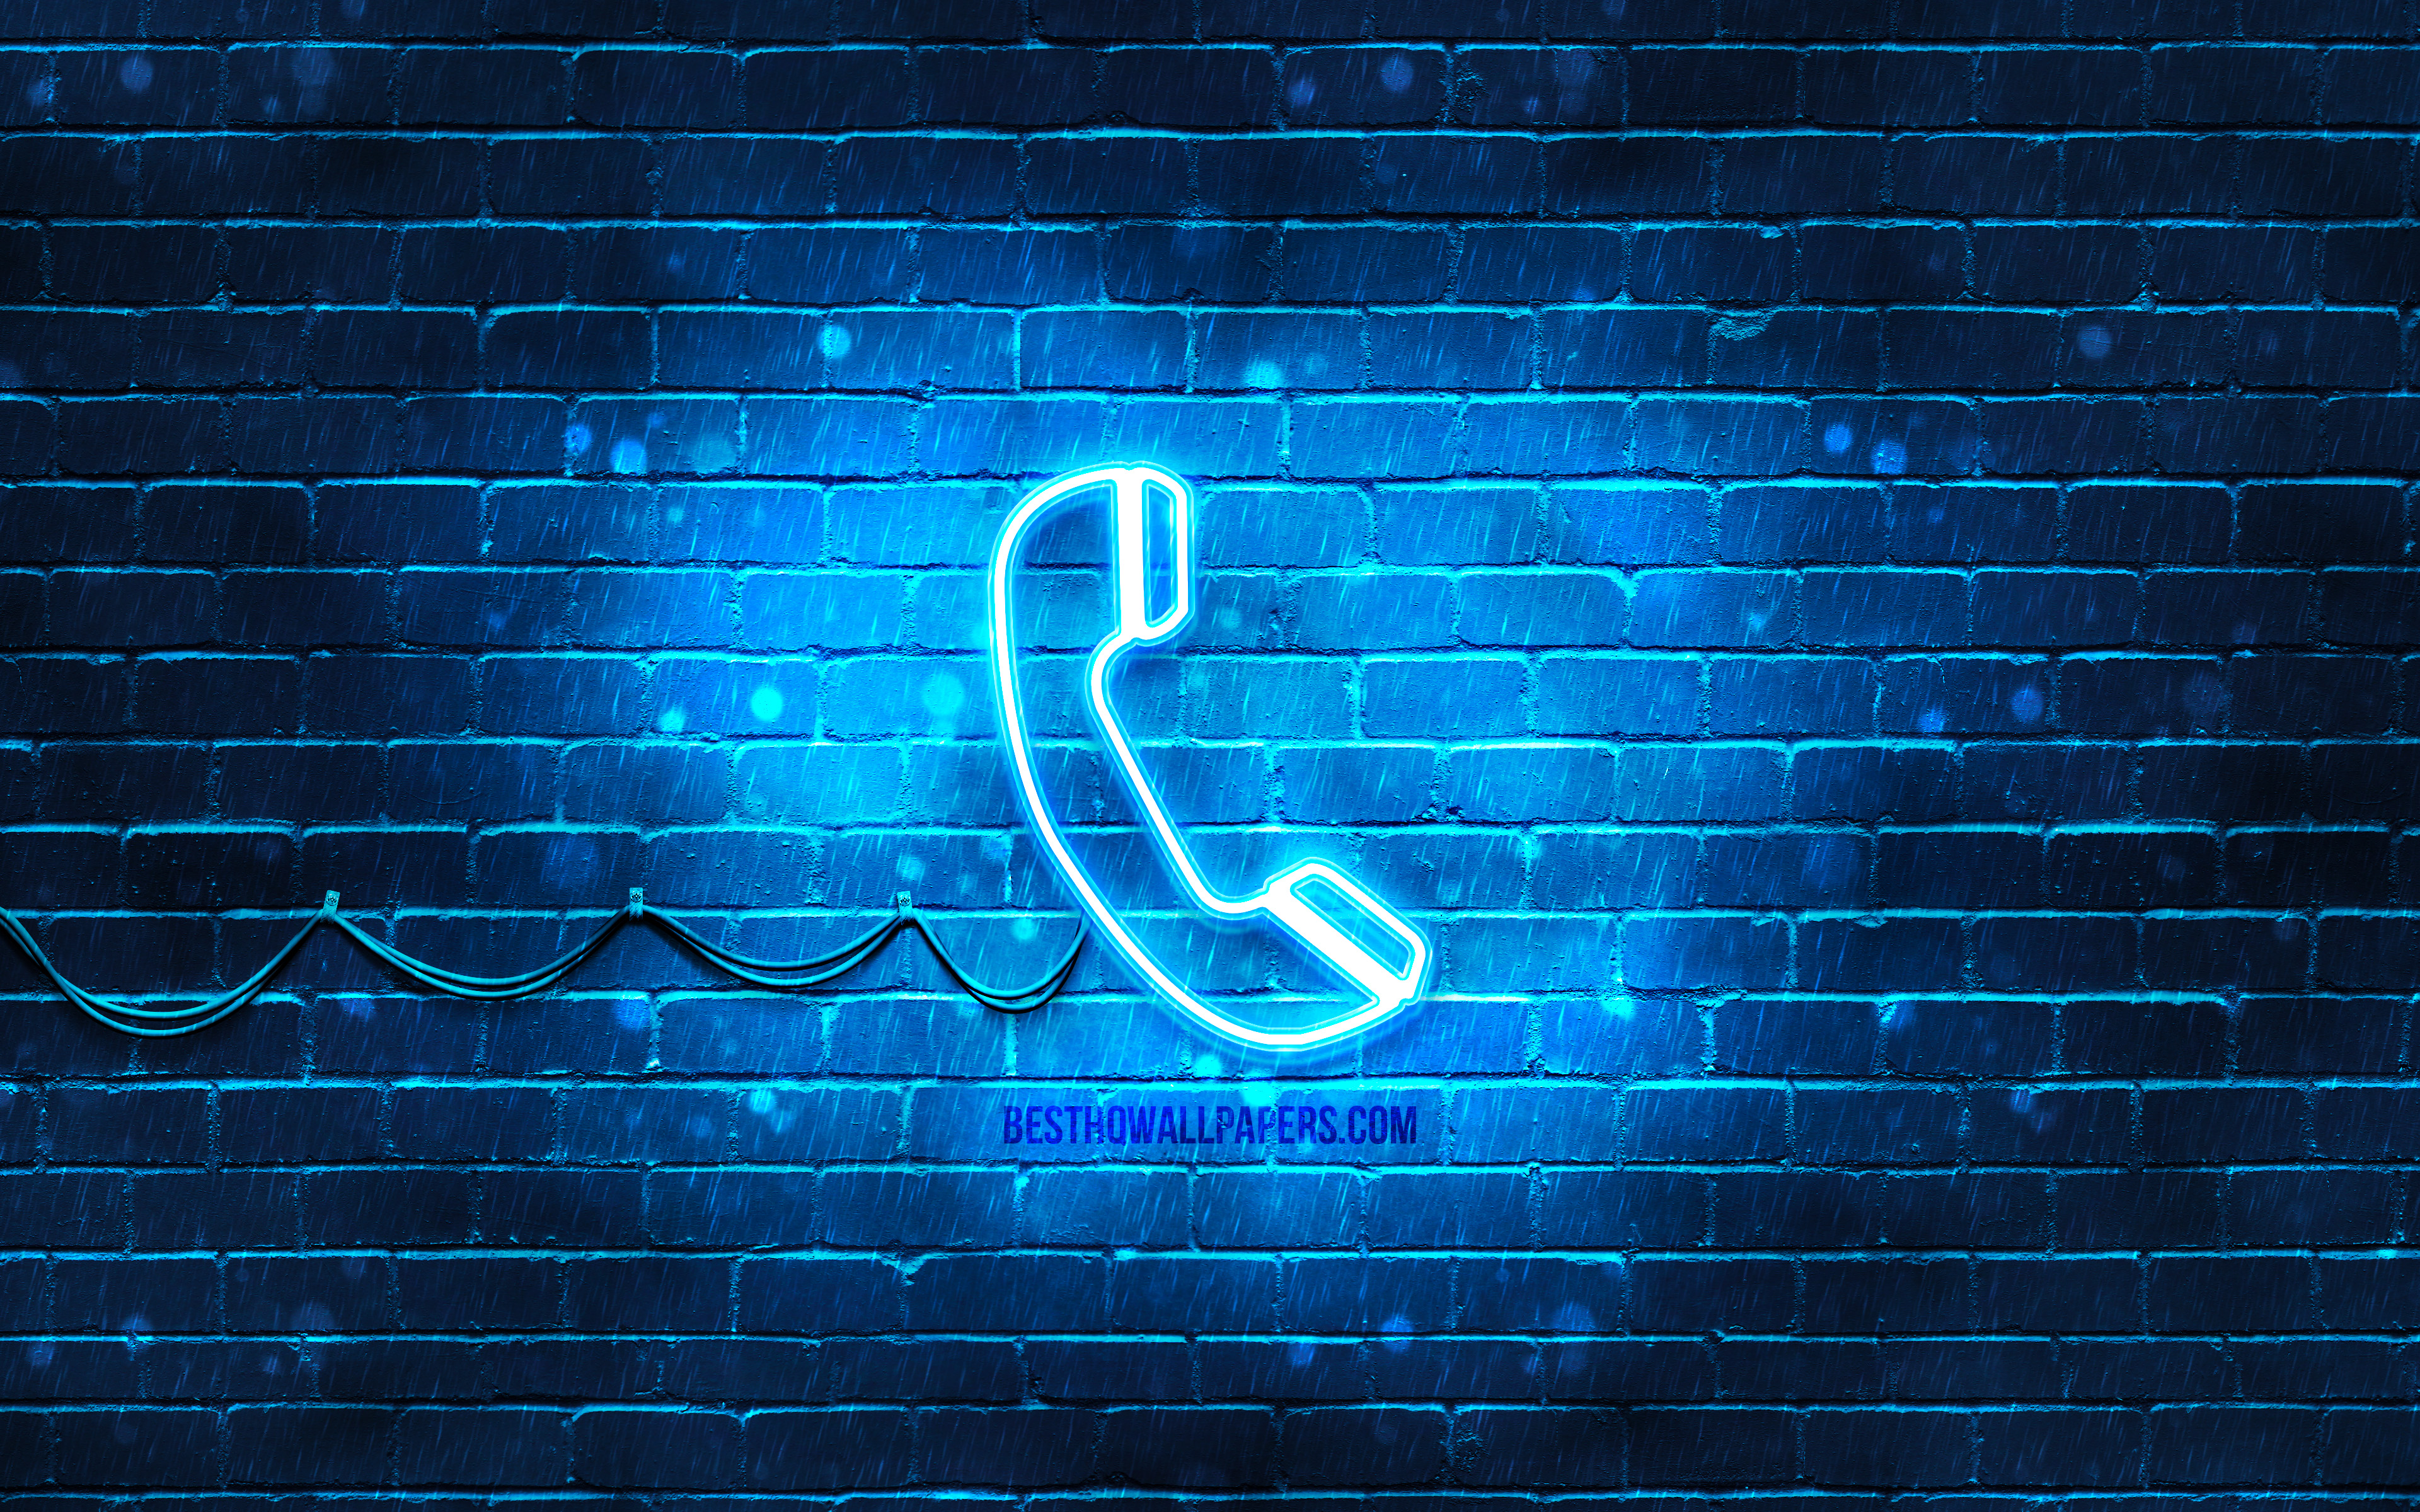 Download wallpaper Phone neon icon, 4k, blue background, neon symbols, Phone, creative, neon icons, Phone sign, communication signs, Phone icon, communication icons for desktop with resolution 3840x2400. High Quality HD picture wallpaper